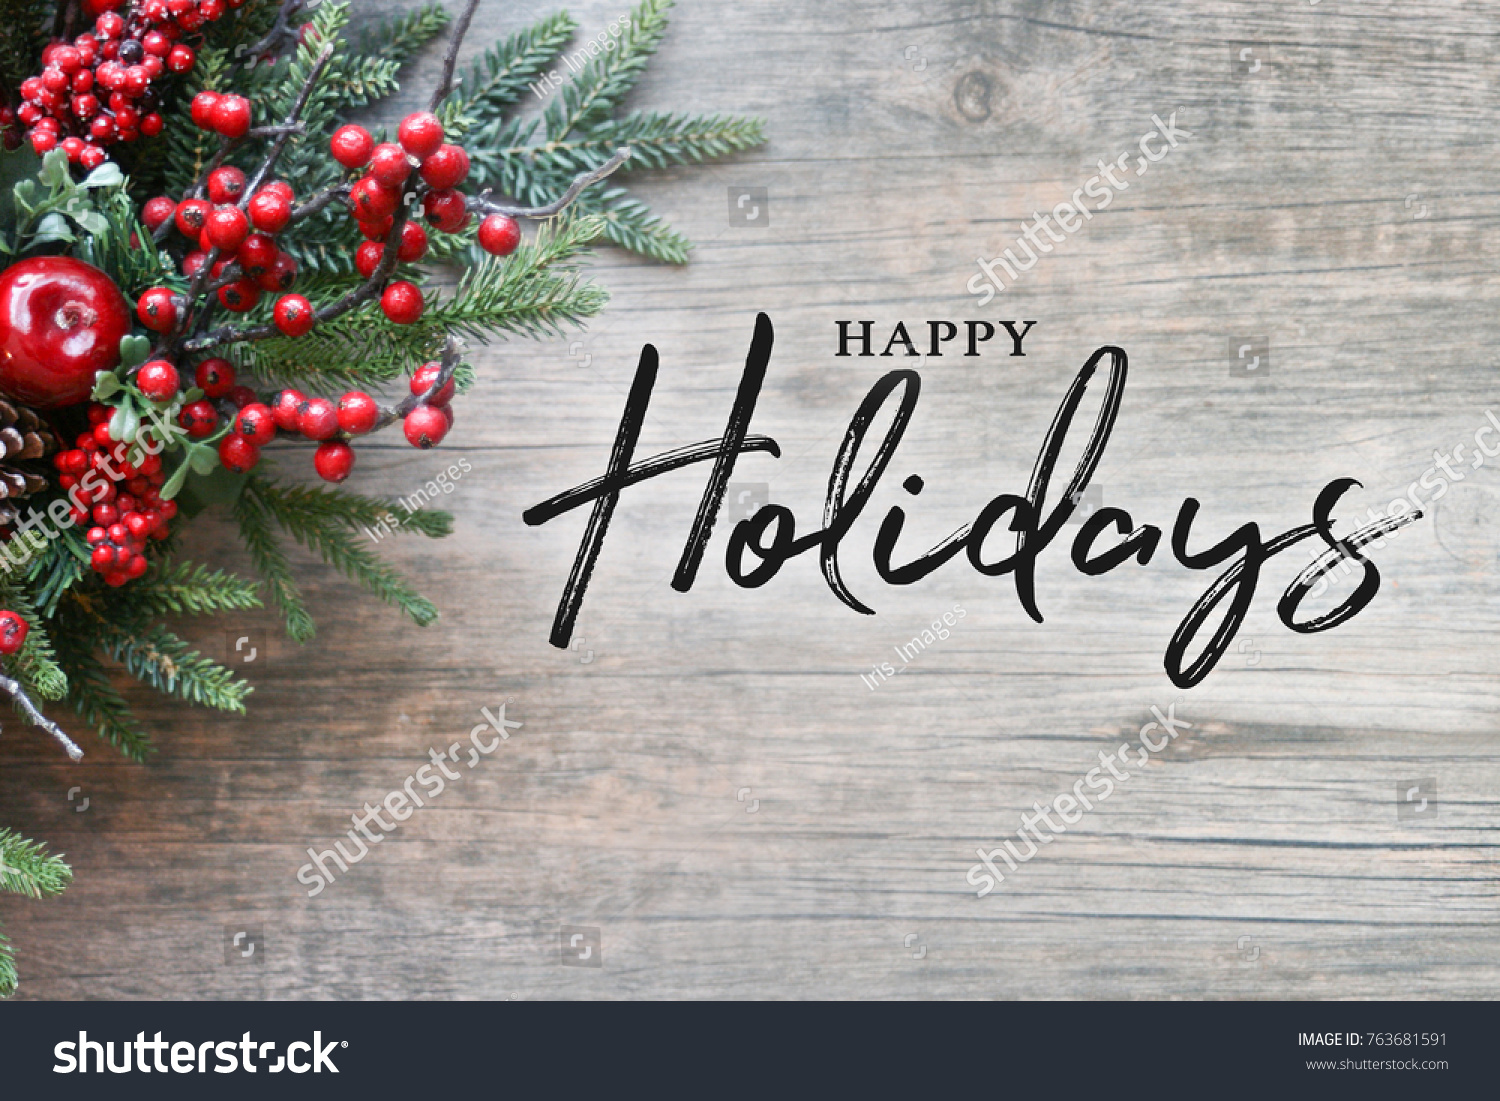 Happy Holidays Text with Christmas Evergreen Branches and Berries in Corner Over Rustic Wooden Background #763681591